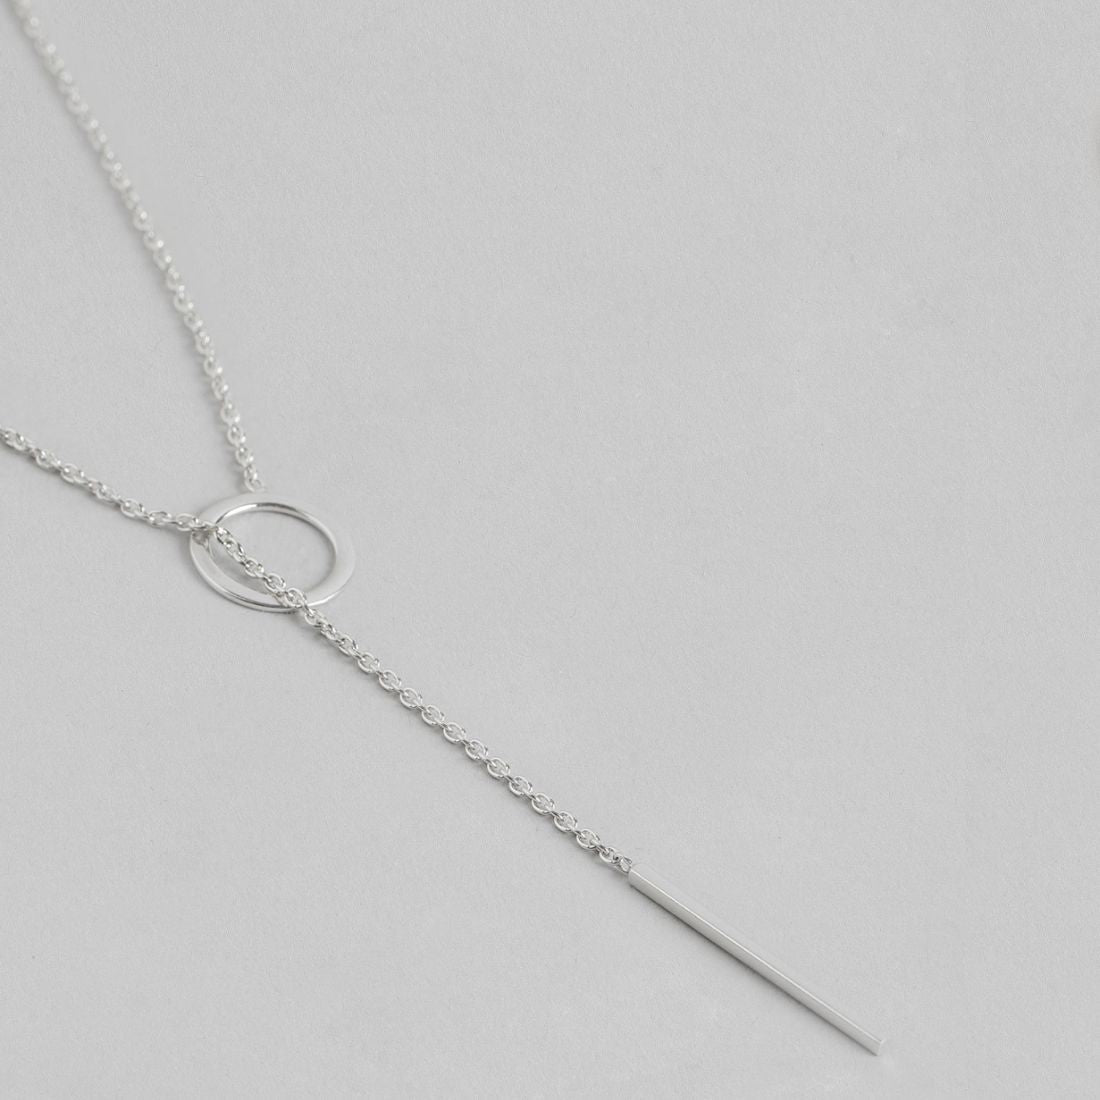 Round Drop Rhodium Plated 925 Sterling Silver Necklace